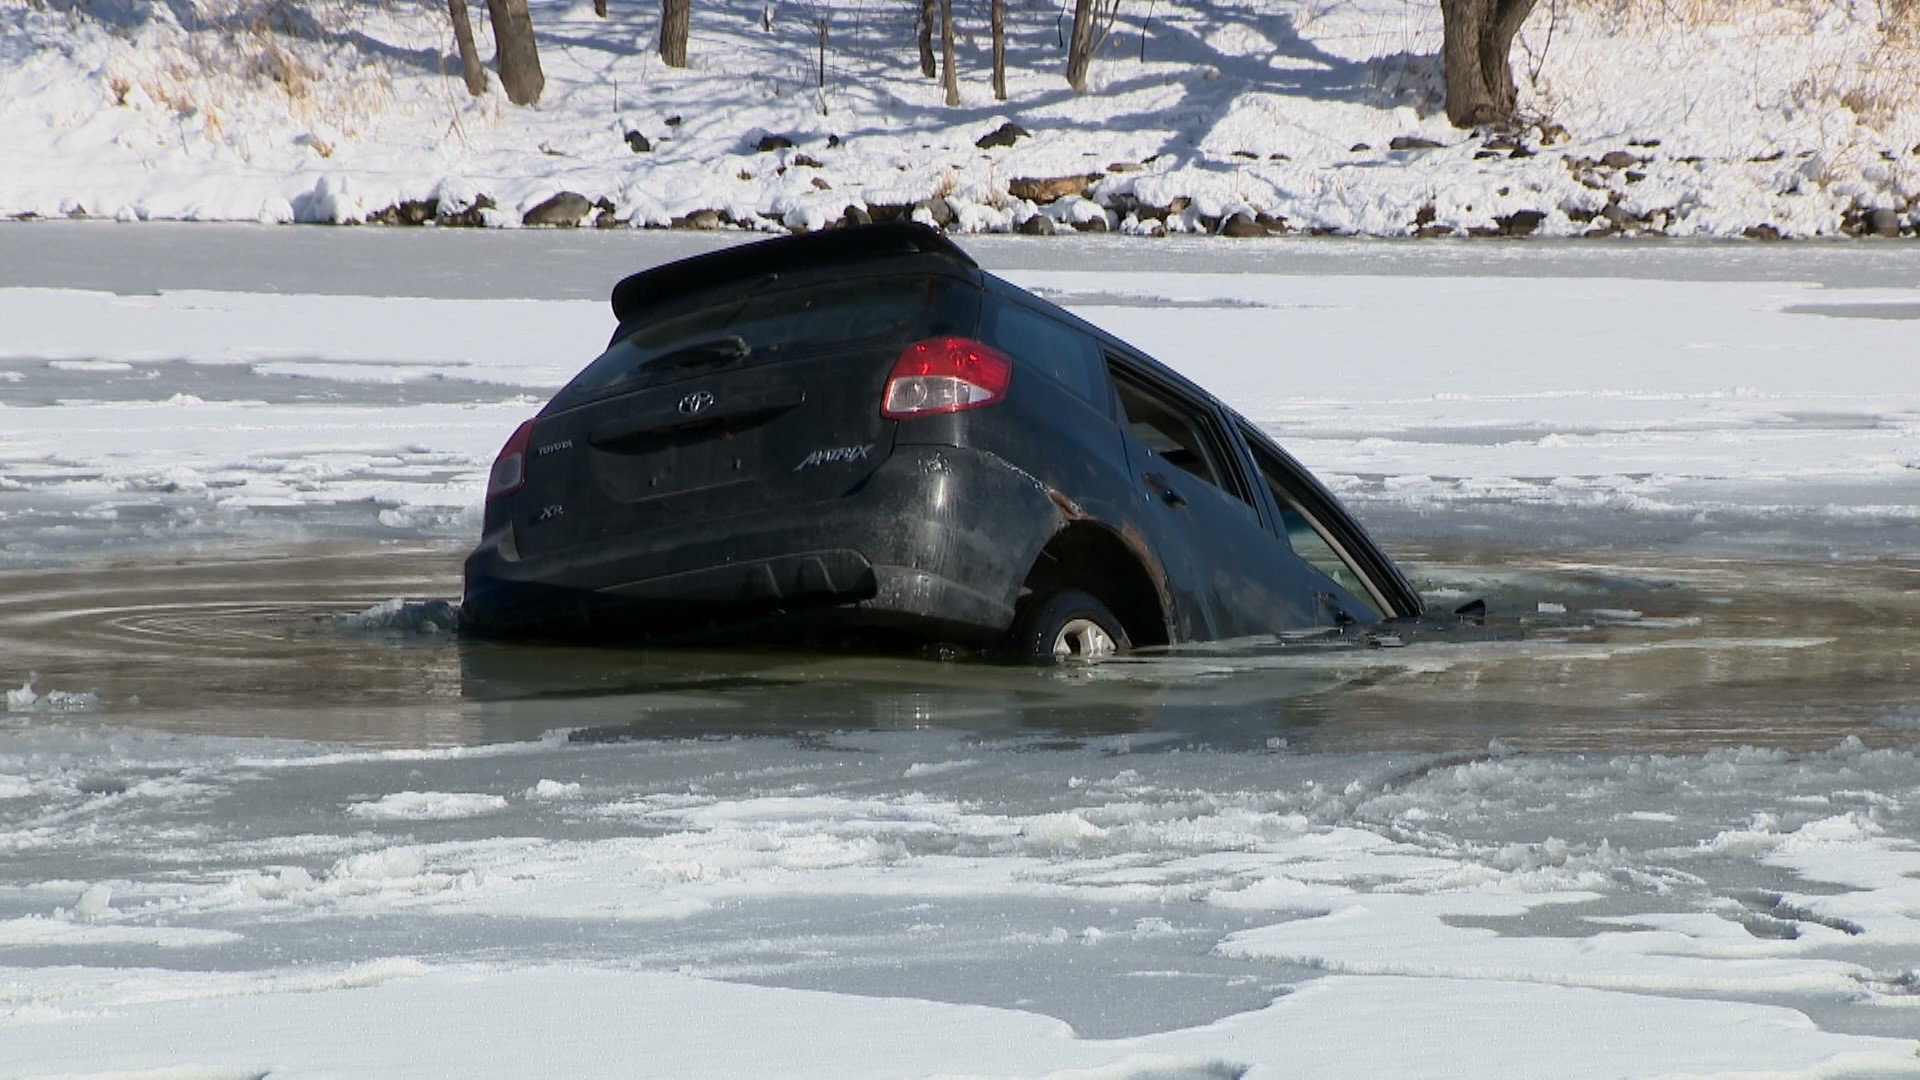 It's been a weird winter and the ice is even more unpredictable. We teamed up with the DNR to sink a car in a lake to show you how to escape.